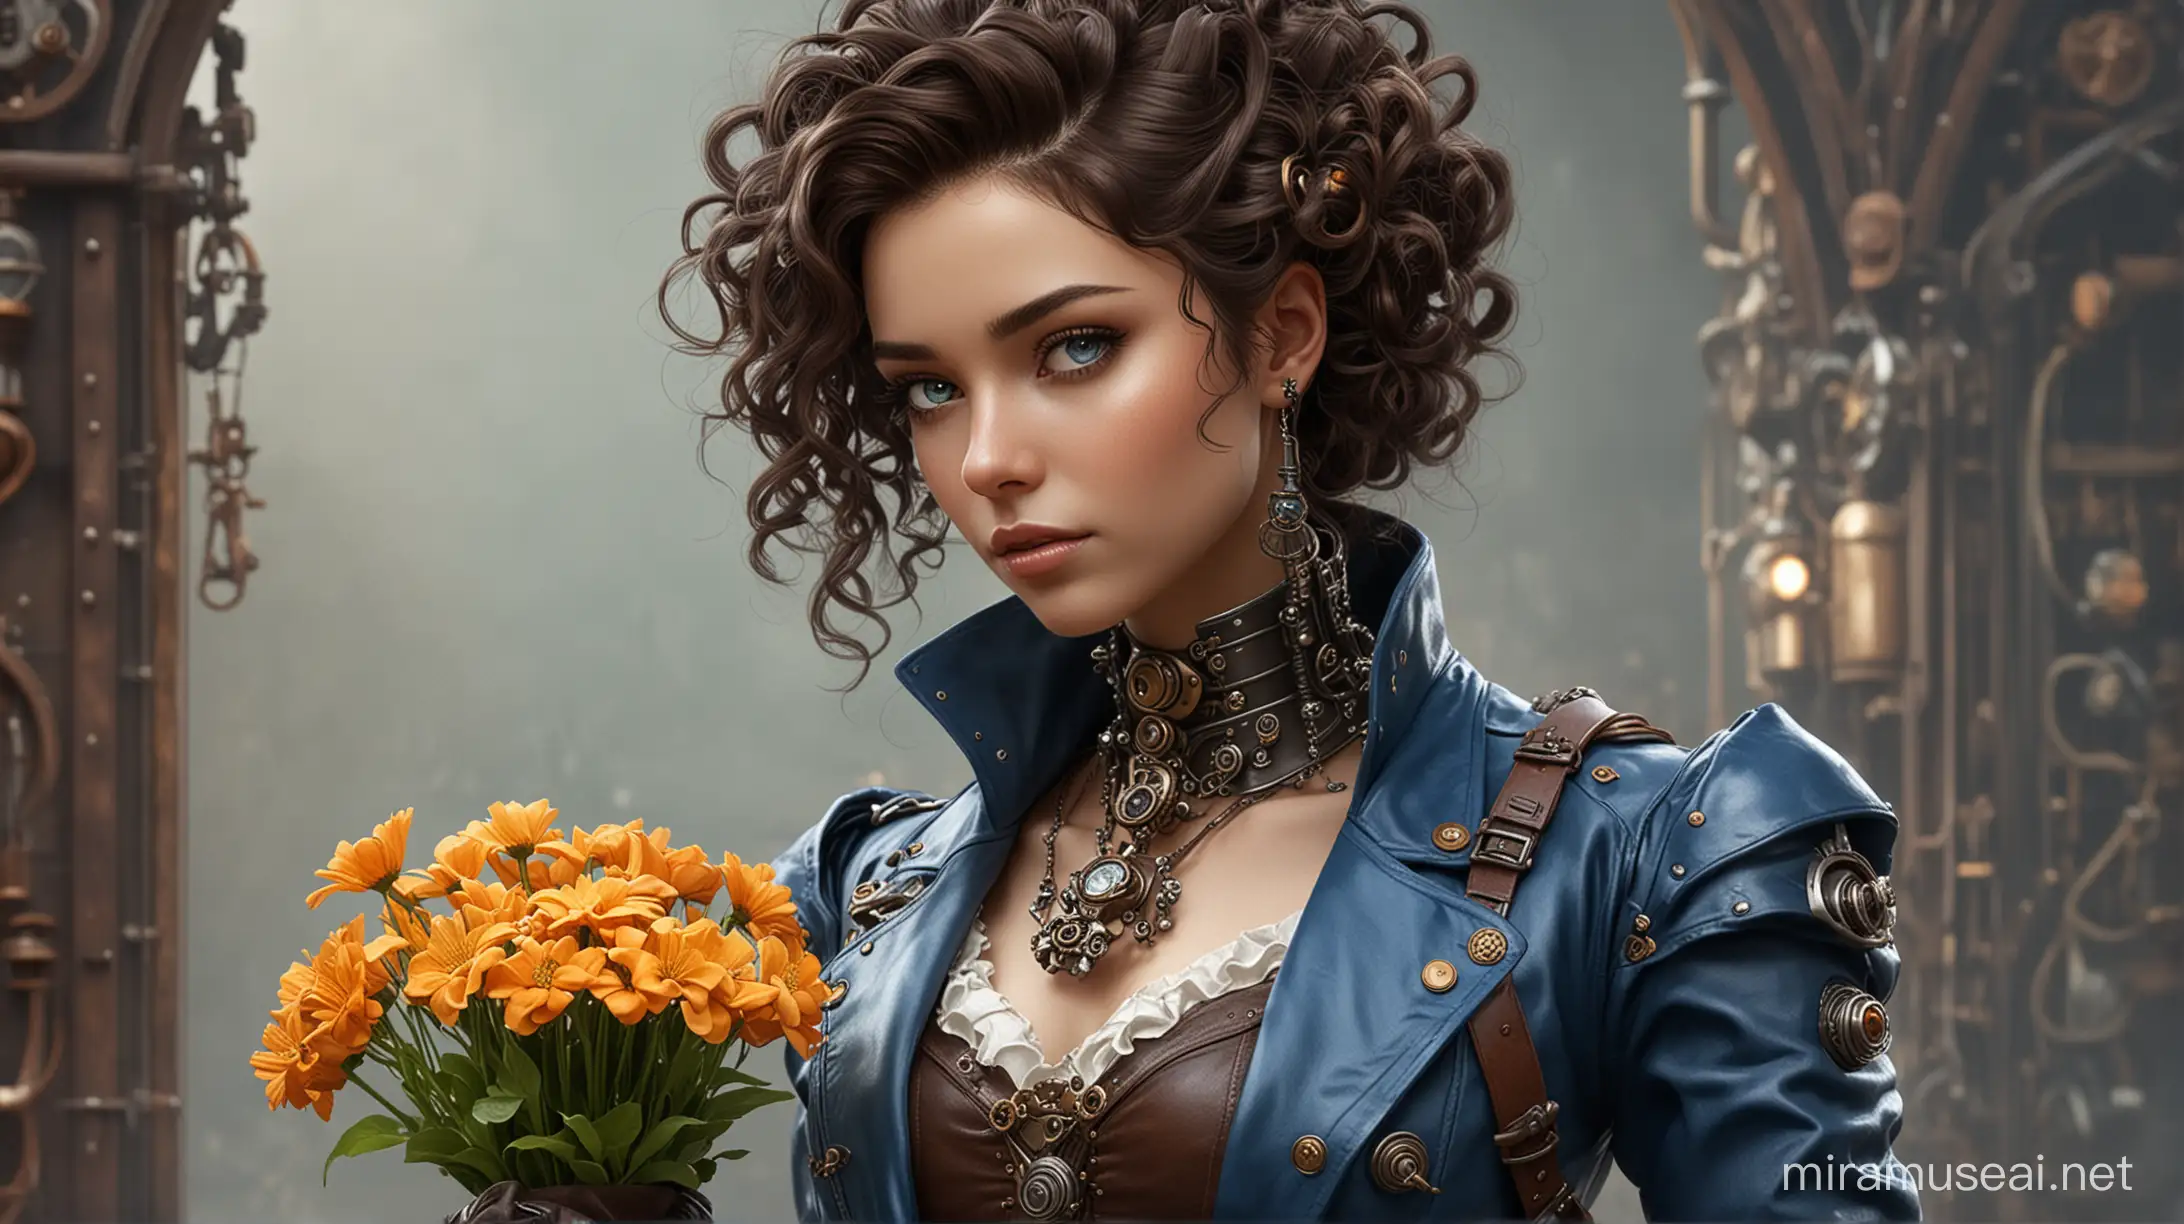 A steampunk robot gives flowers to a young  steampunk woman with dark, curly hair, leather steampunk blue jacket , delicate steampunk jewelry.